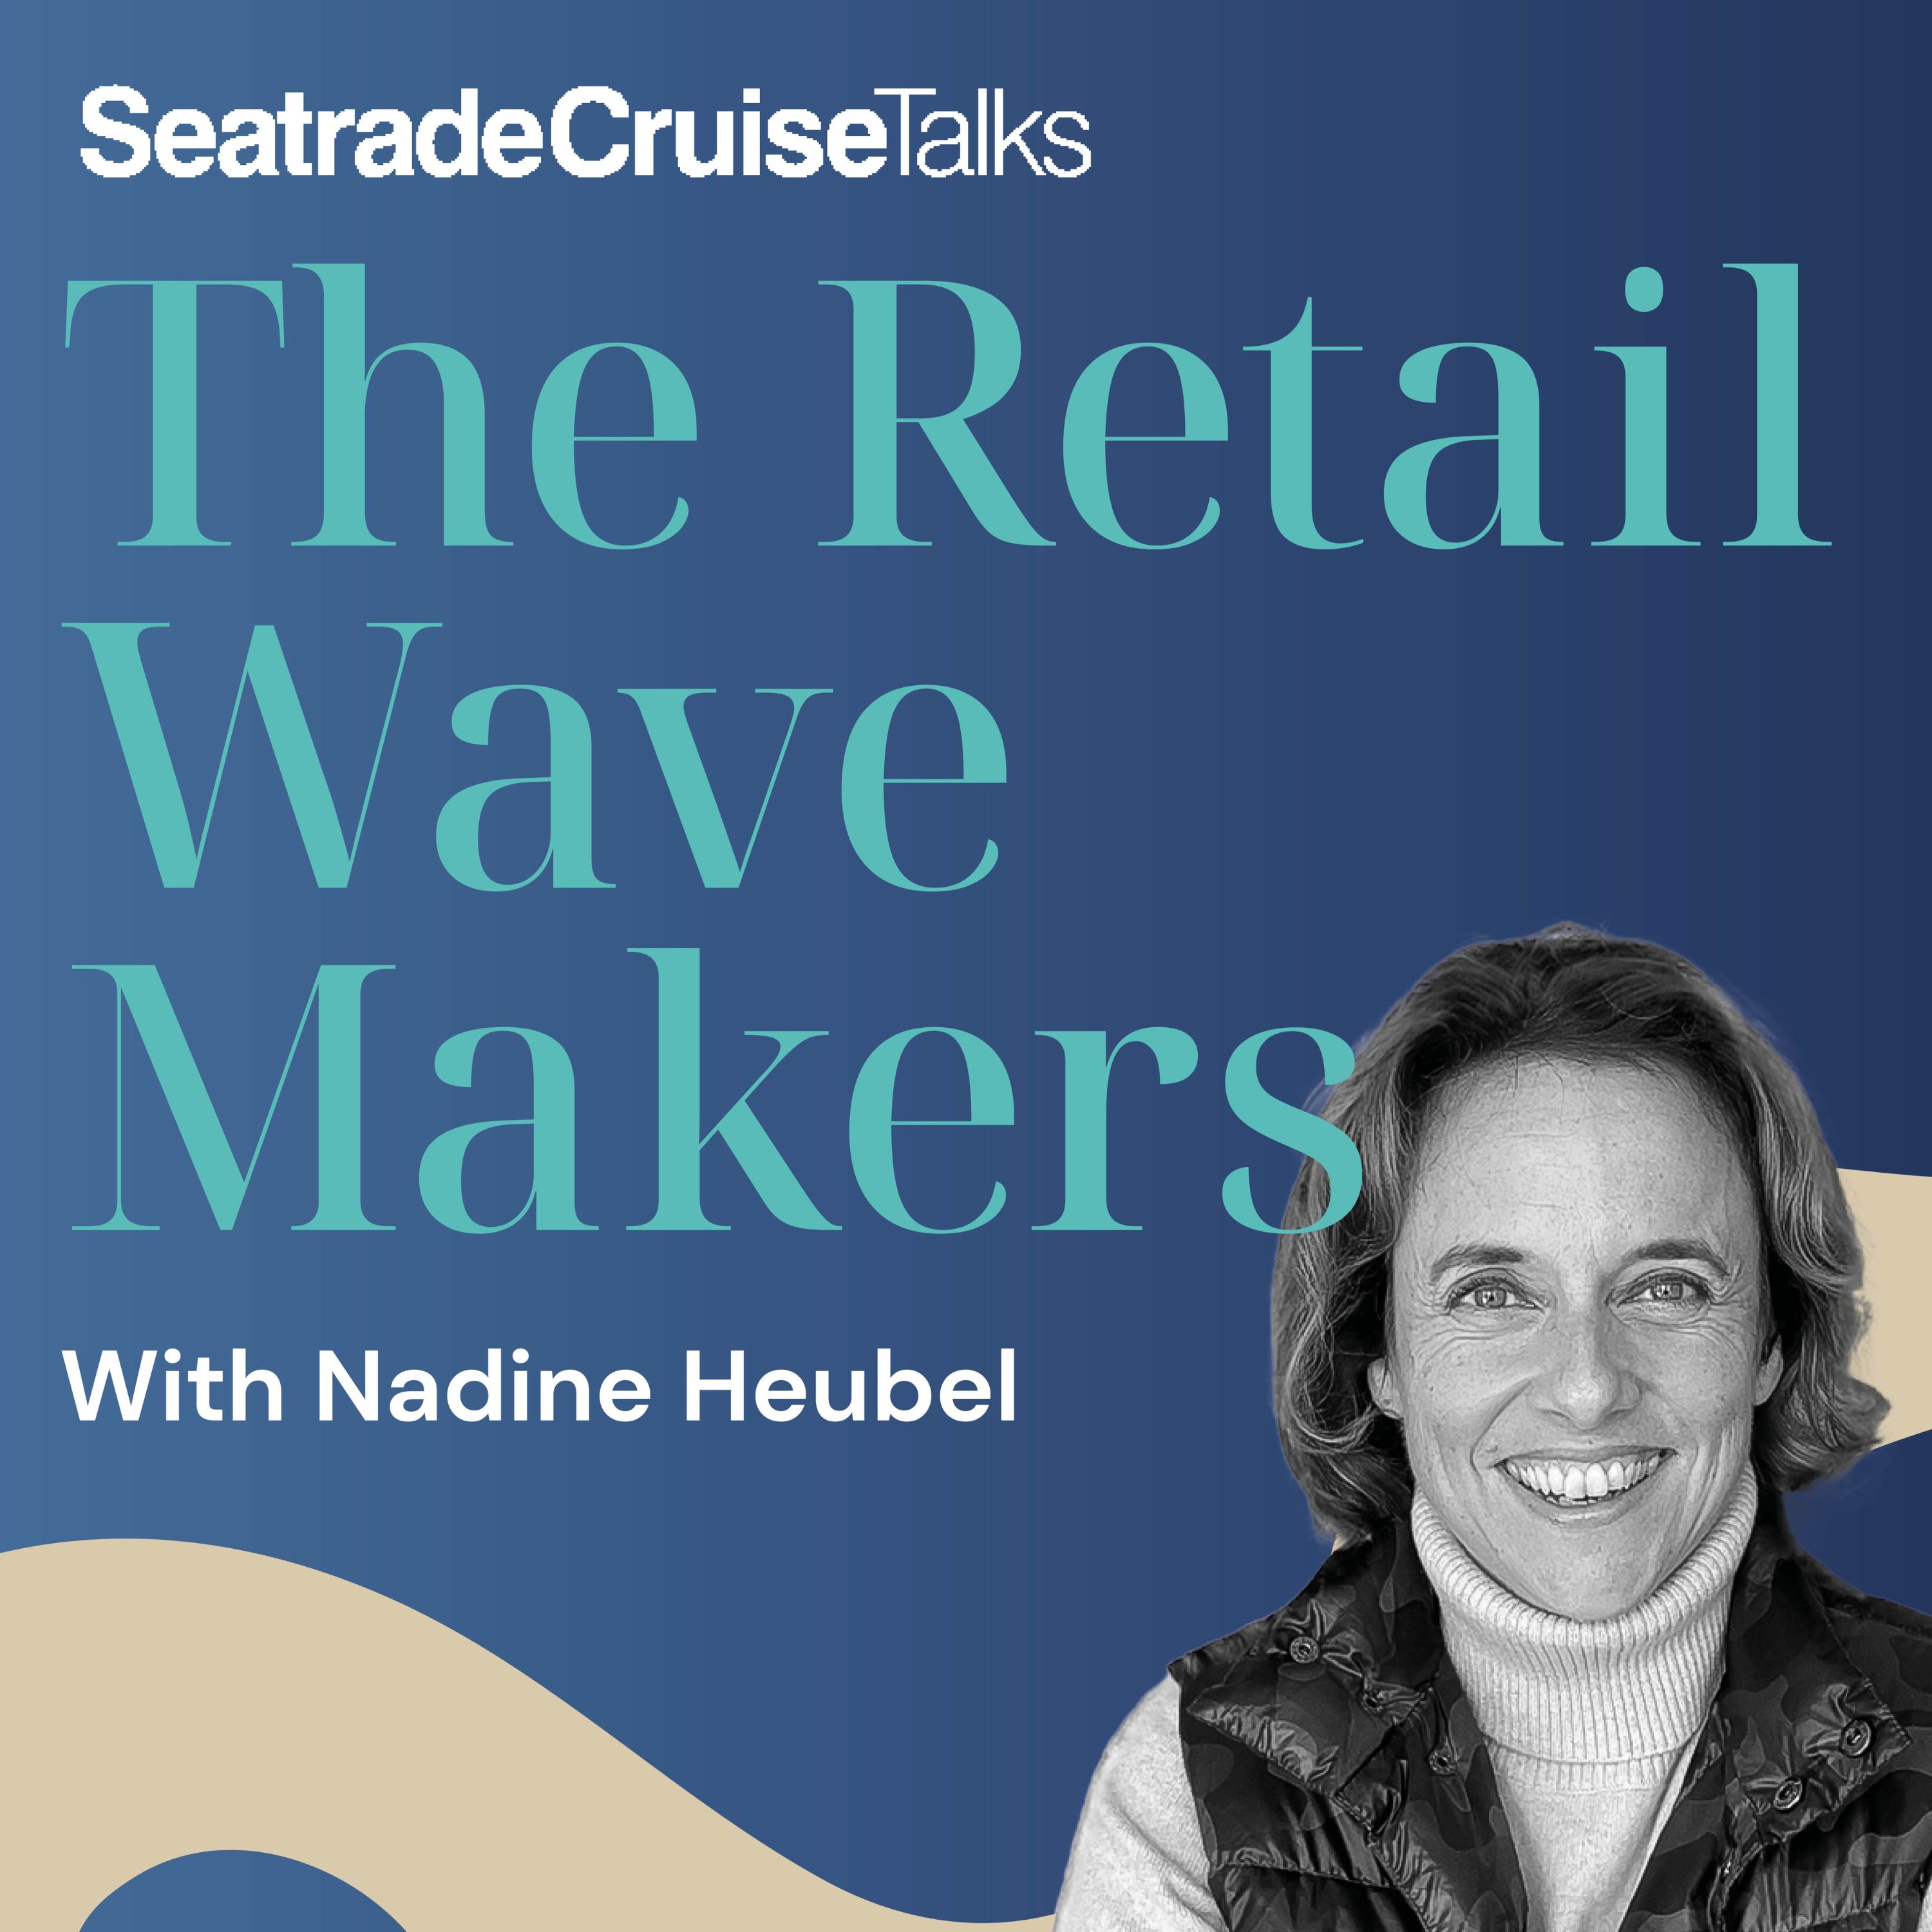 The Retail Wave Makers | Chris „The Flying Scotsman“, Carnival Cruise Line